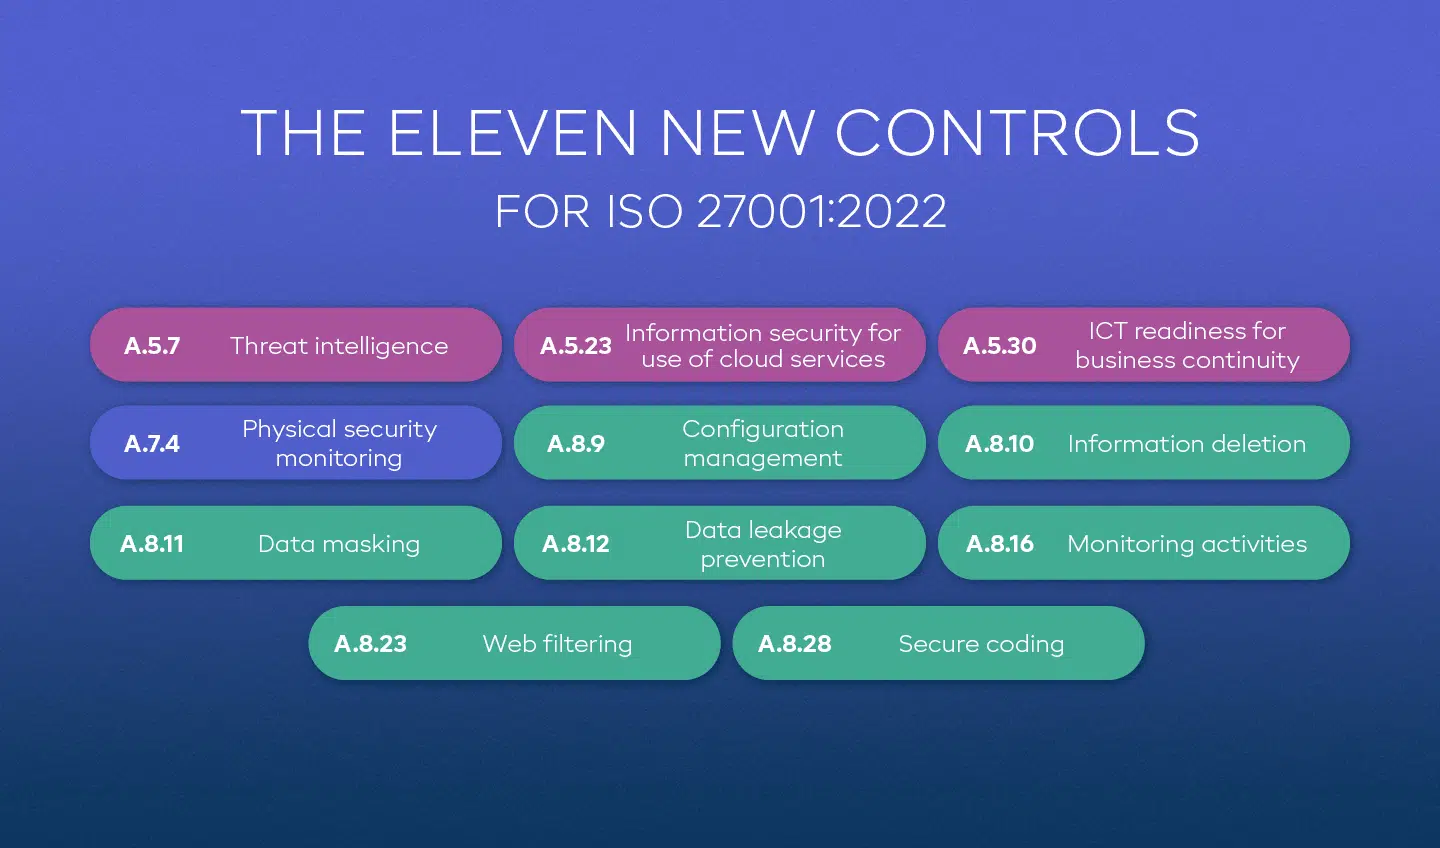 the 11 new controls for ISO 27001:2022